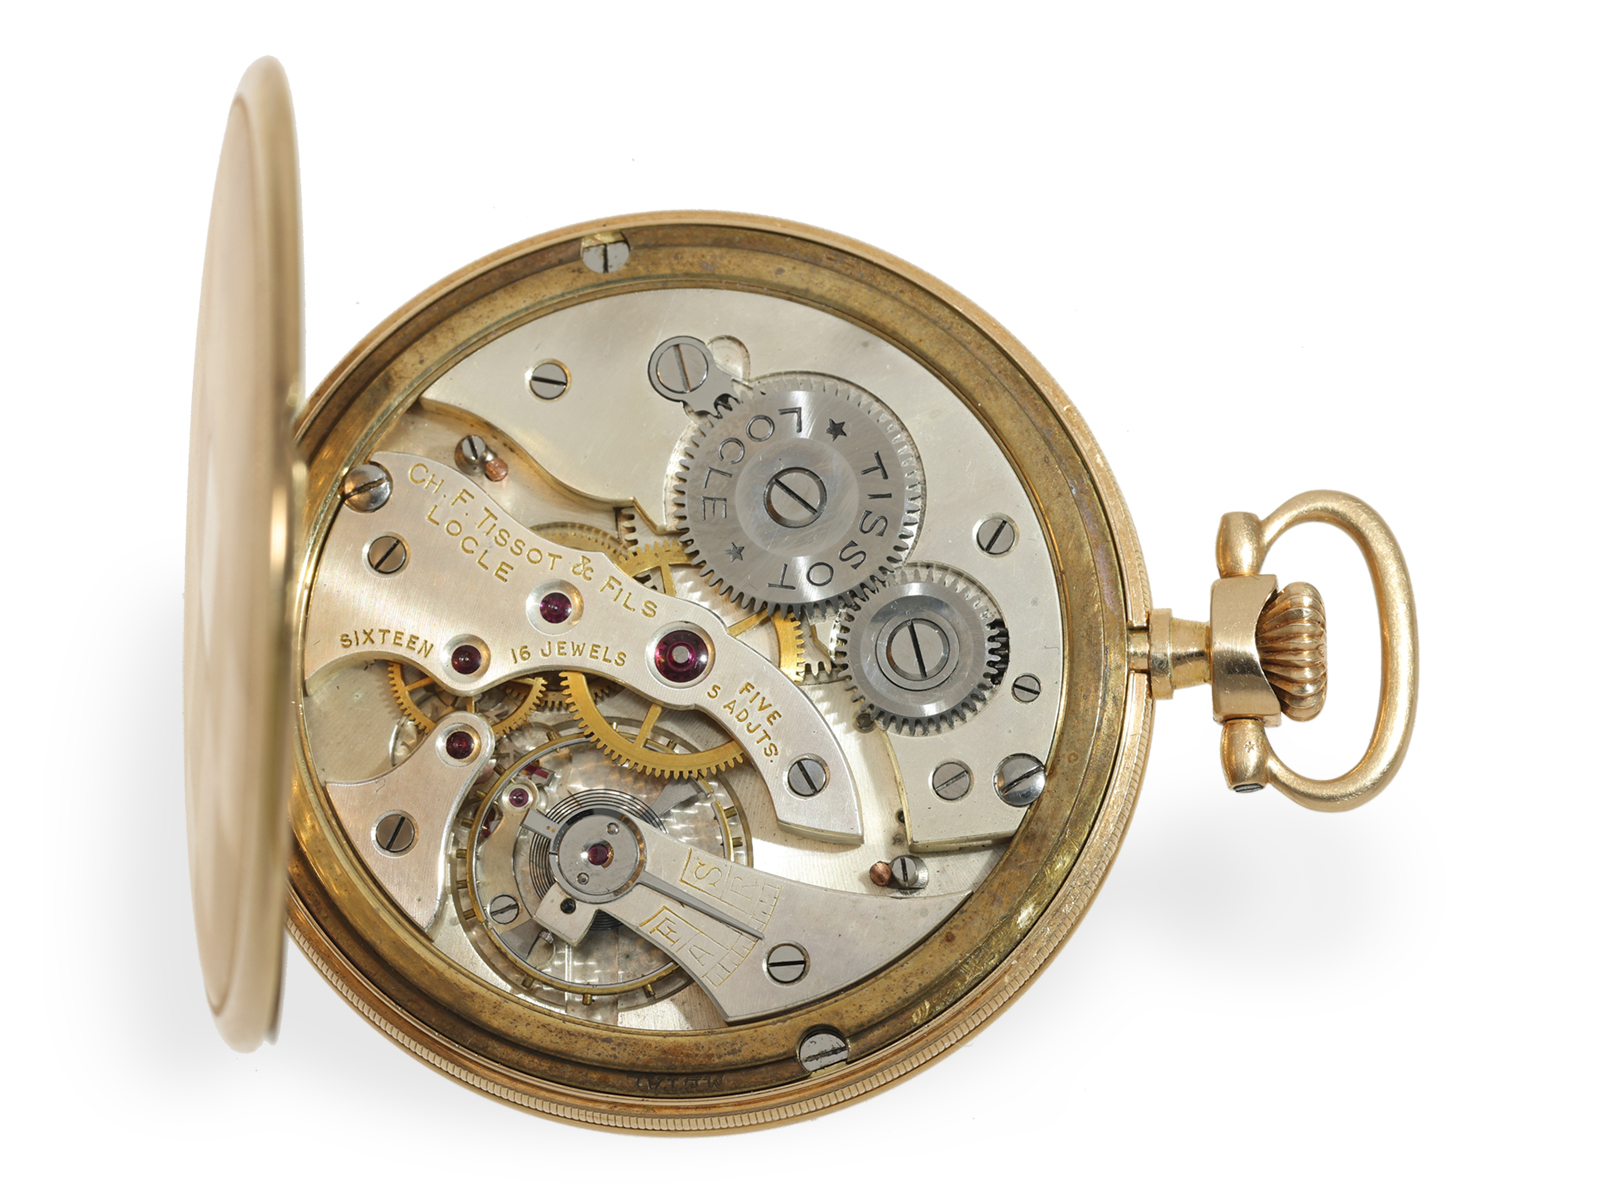 Pocket watch: excellently preserved dress watch by Tissot, ca. 1925 - Image 4 of 6